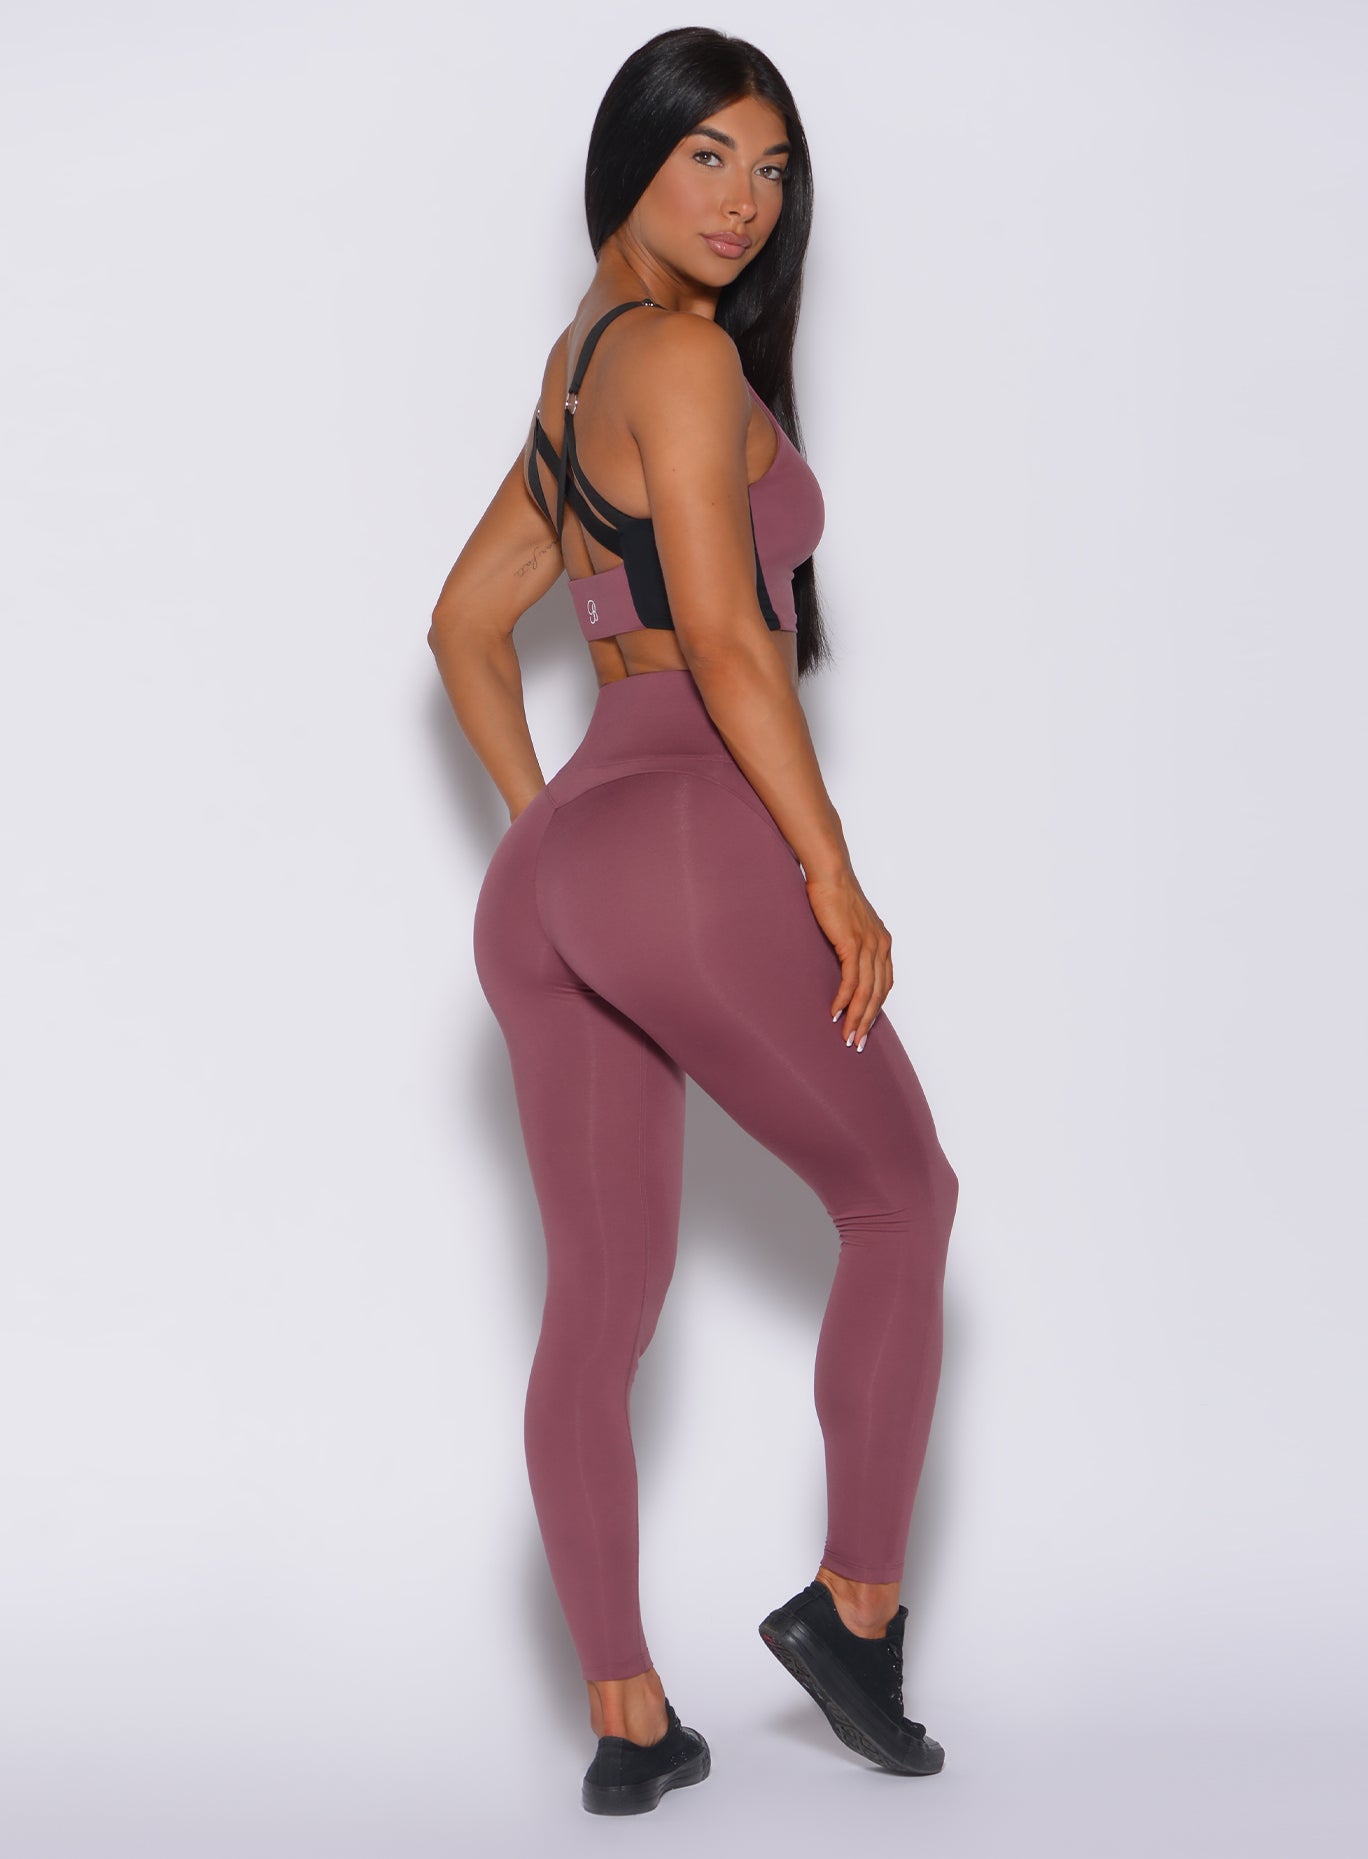 Right side profile view of a model in our snatched waist leggings in merlot color and a matching bra